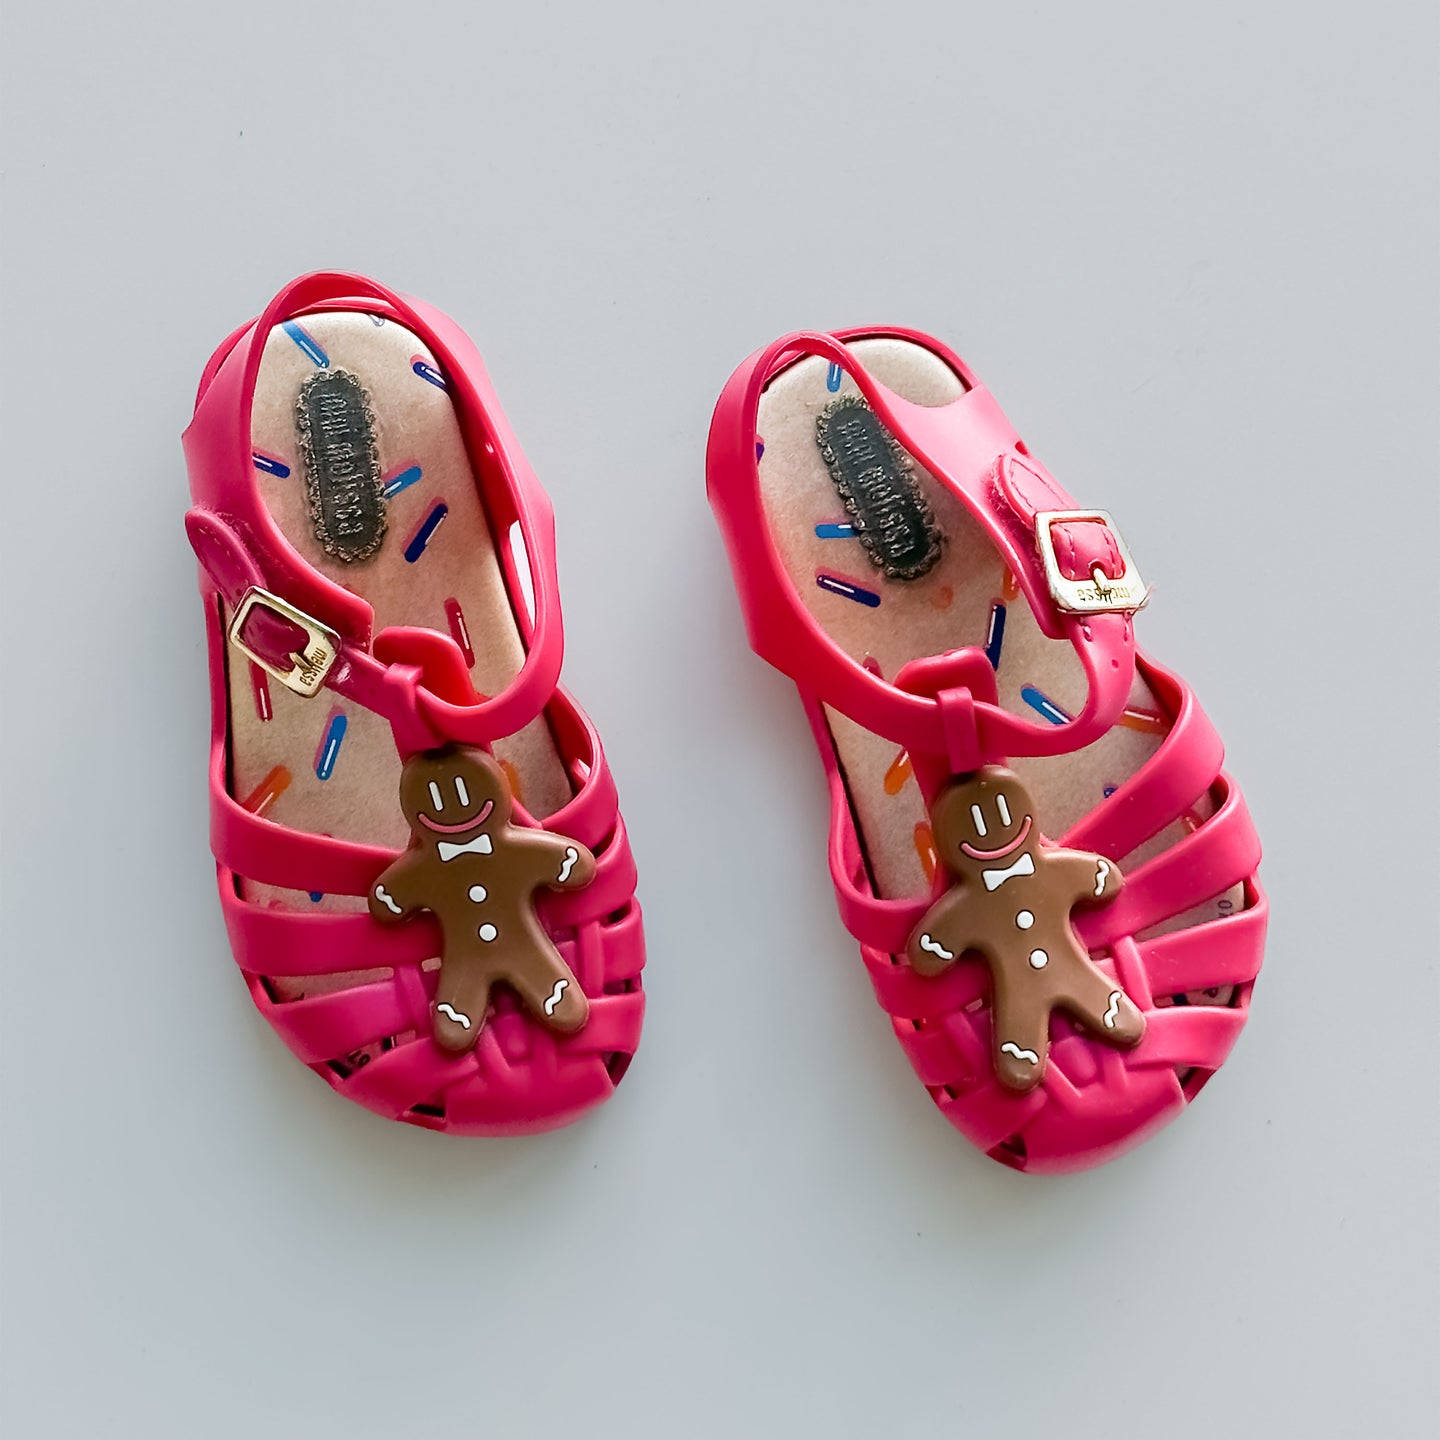 [US6] Mini Melissa Soft Pink Jelly Shoes -Gingerbread man